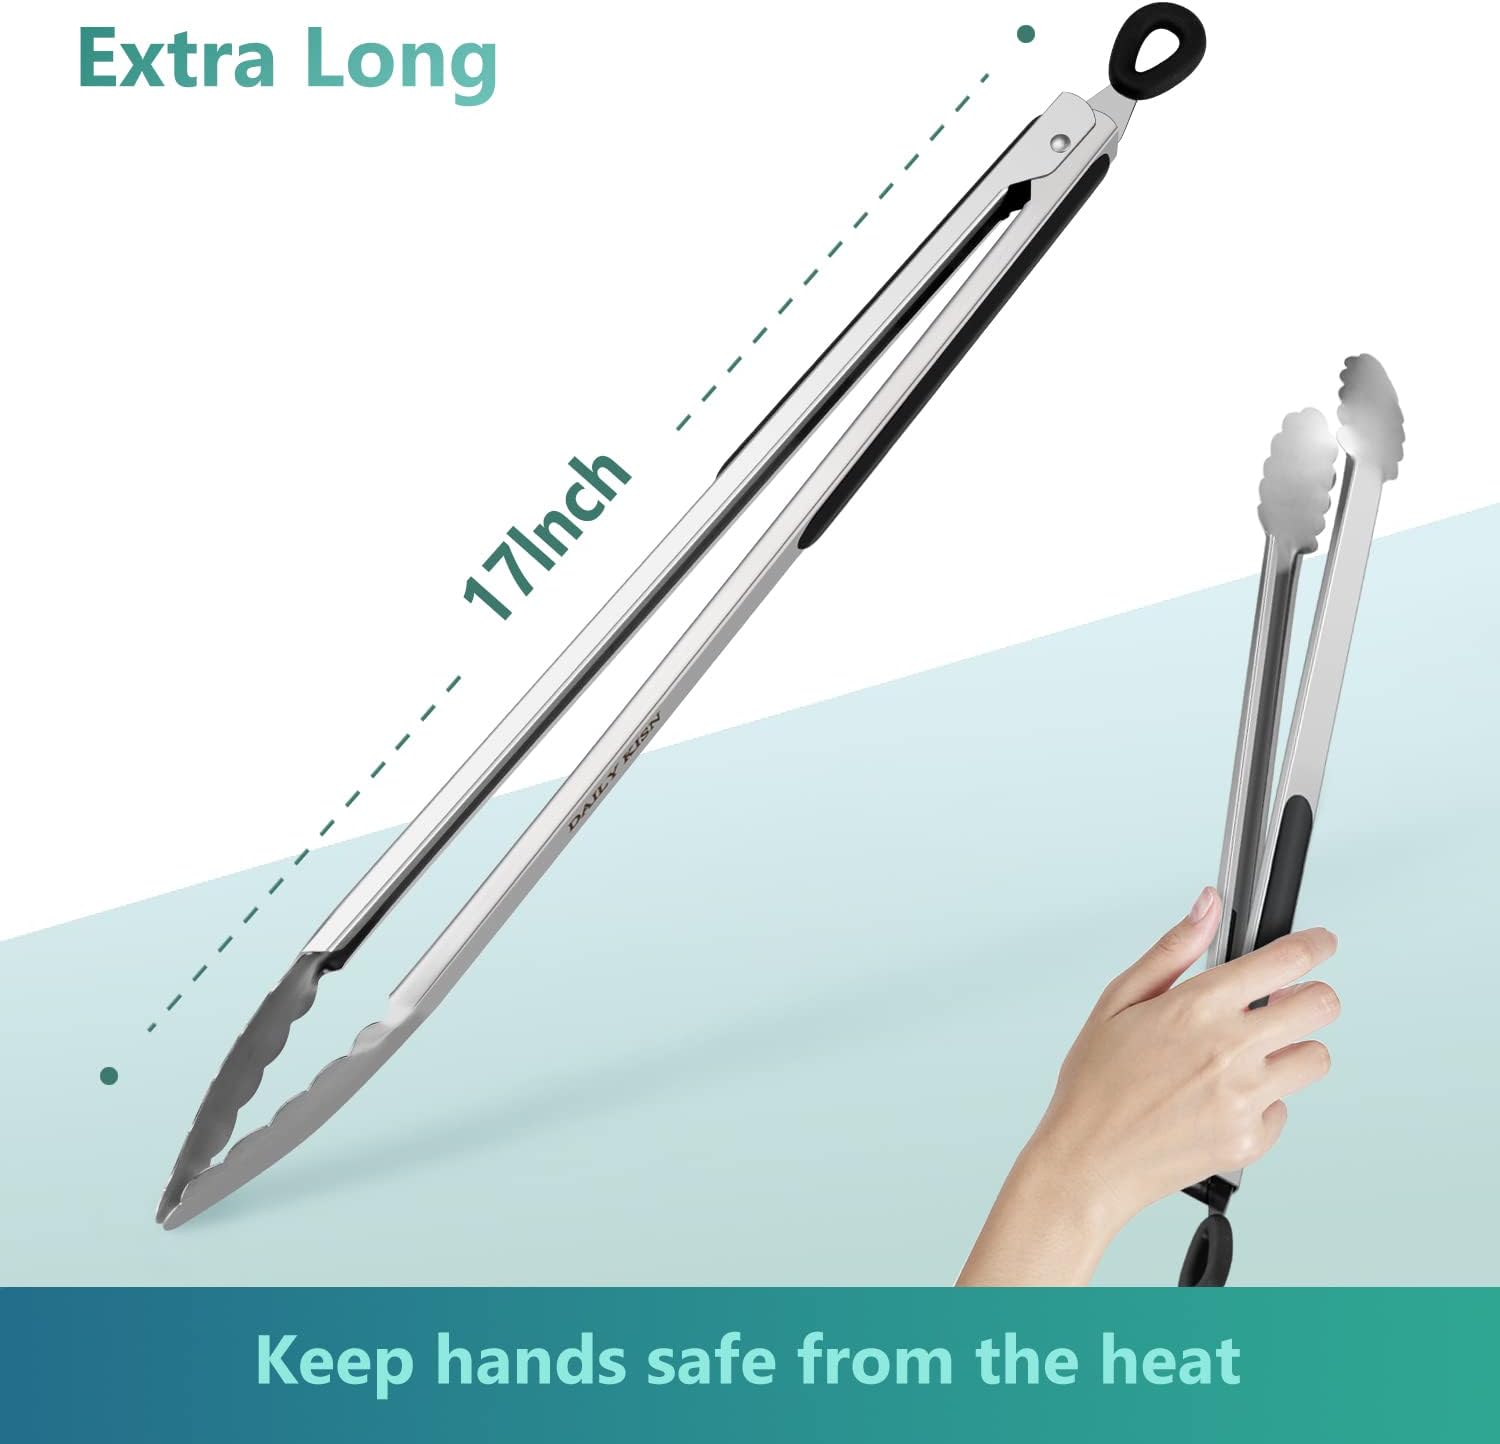 Grill Tongs, 17 Inch Extra Long BBQ Tongs, Premium Stainless Steel Metal Tongs for Cooking, Grilling, Barbecue/BBQ, Buffet (17, 1PC)